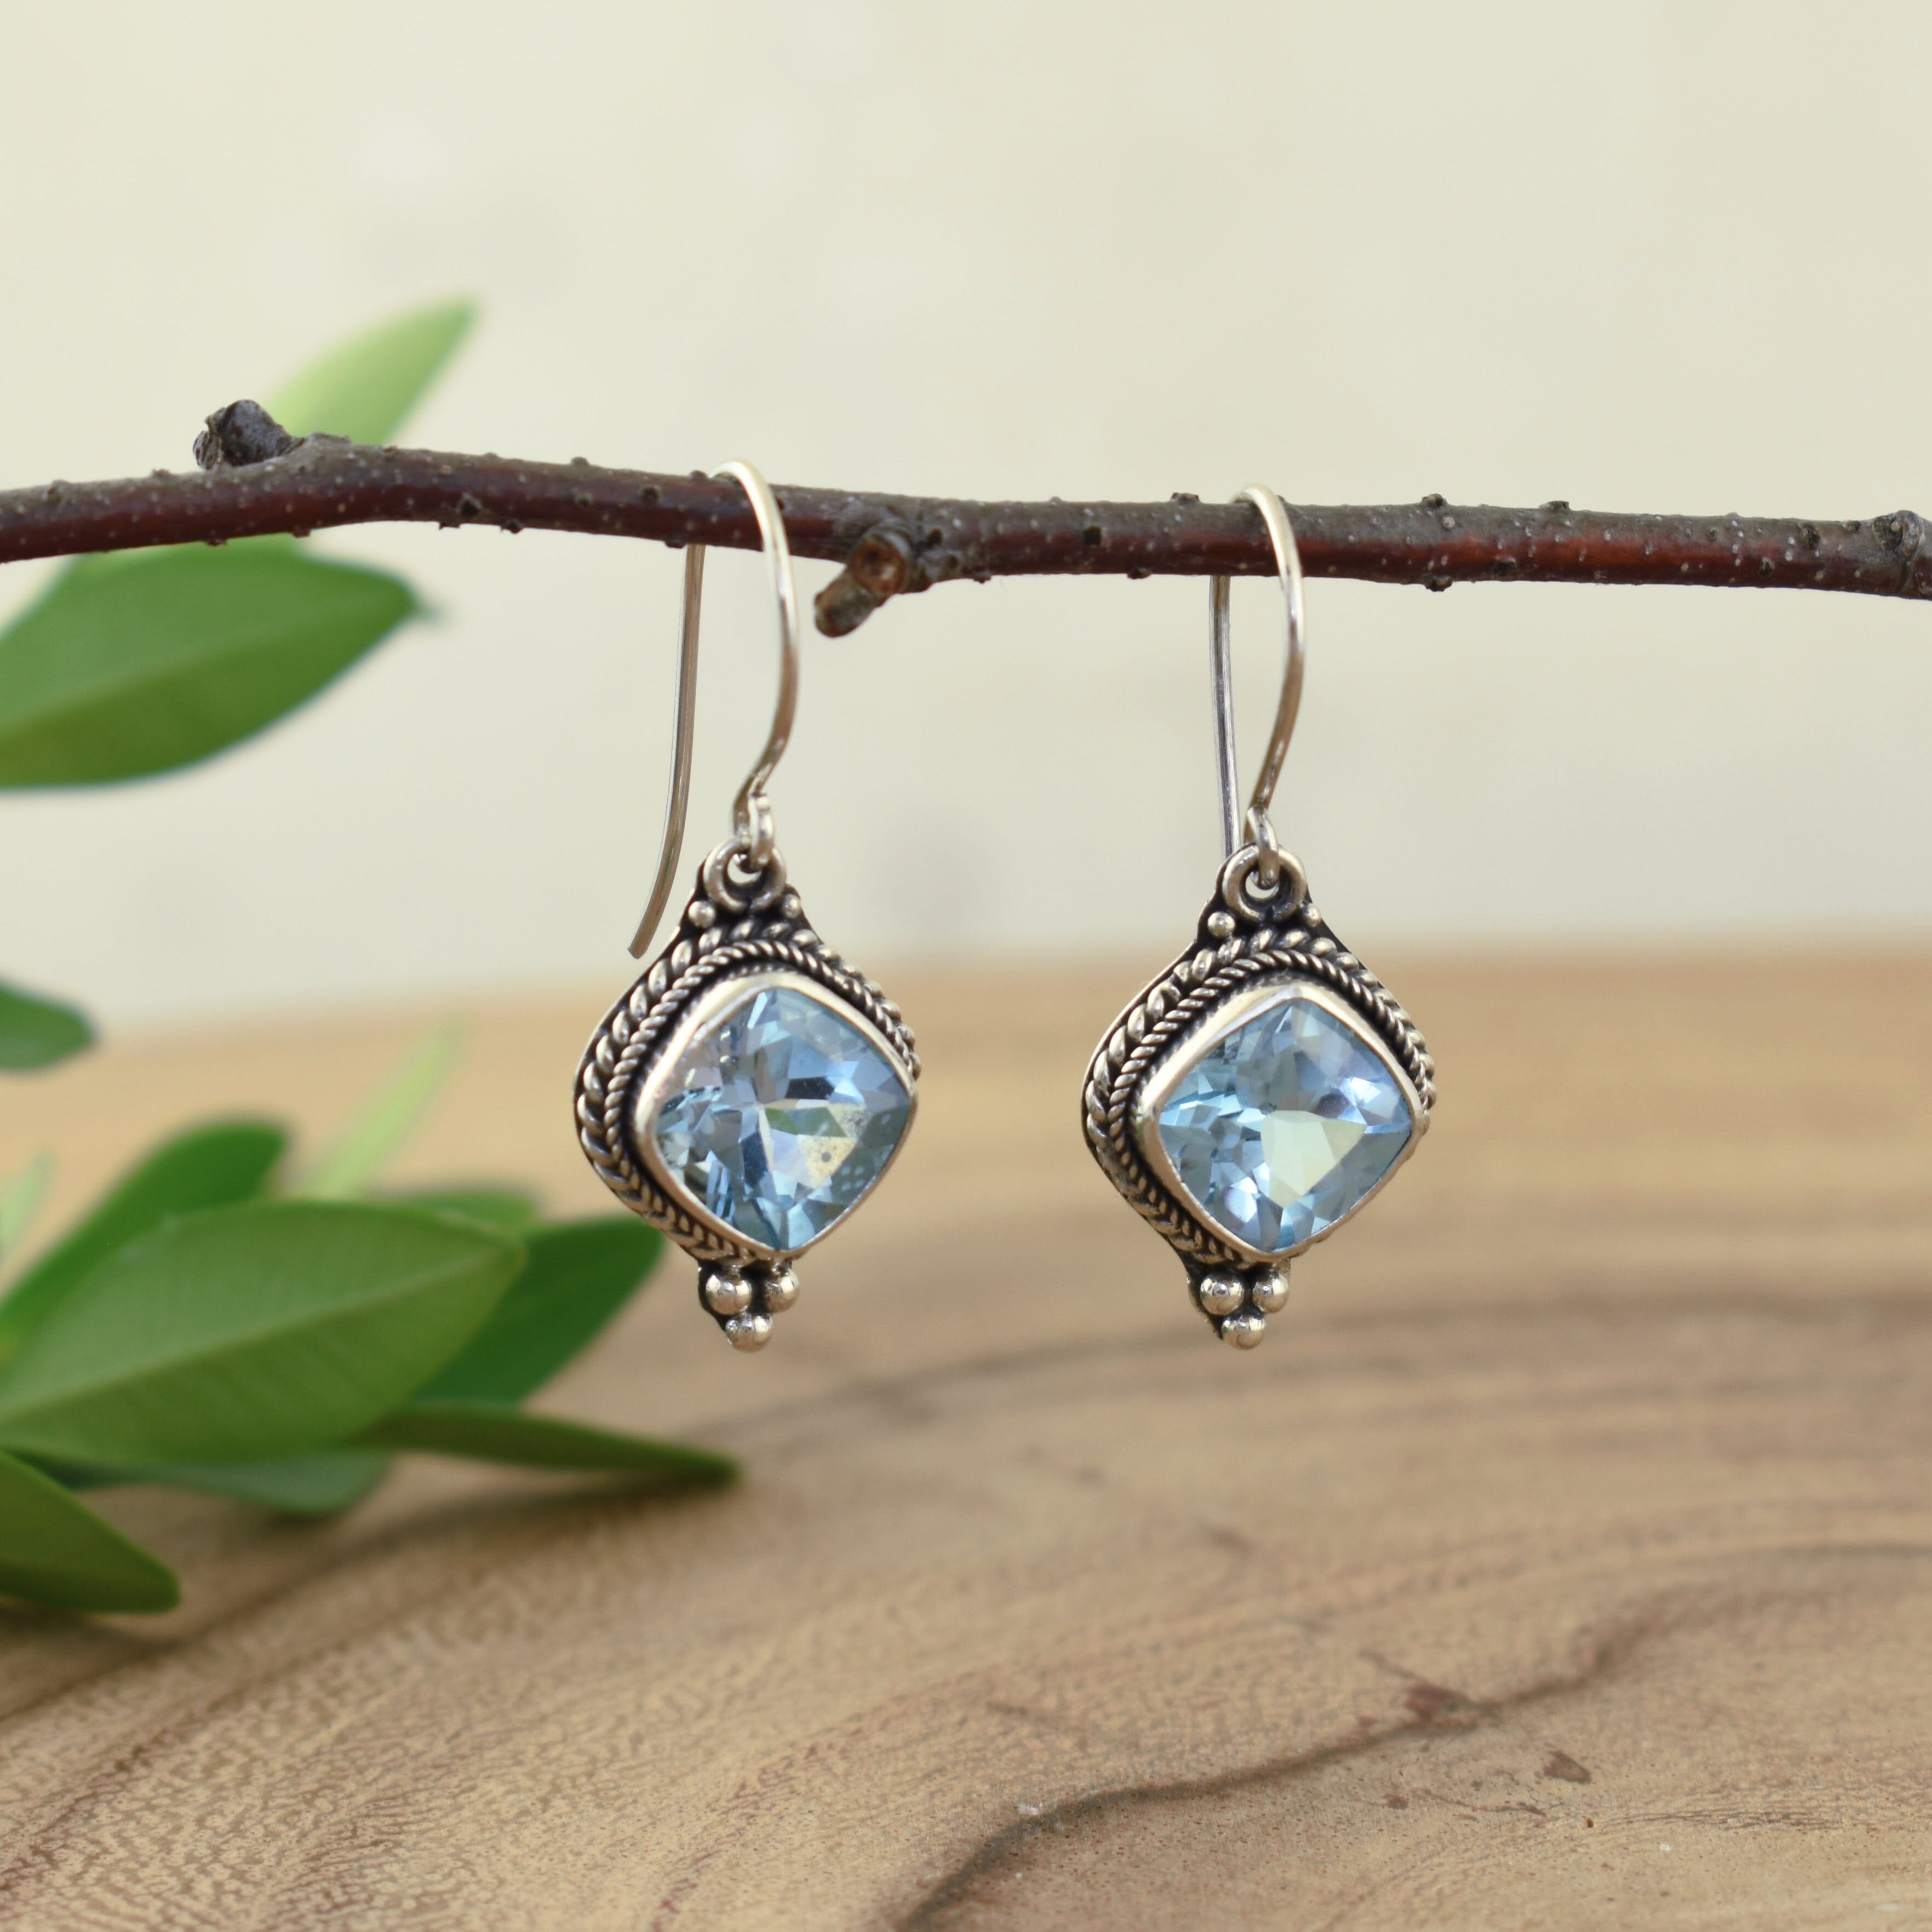 sterling silver french wire earrings featuring cushion cut blue topaz stones